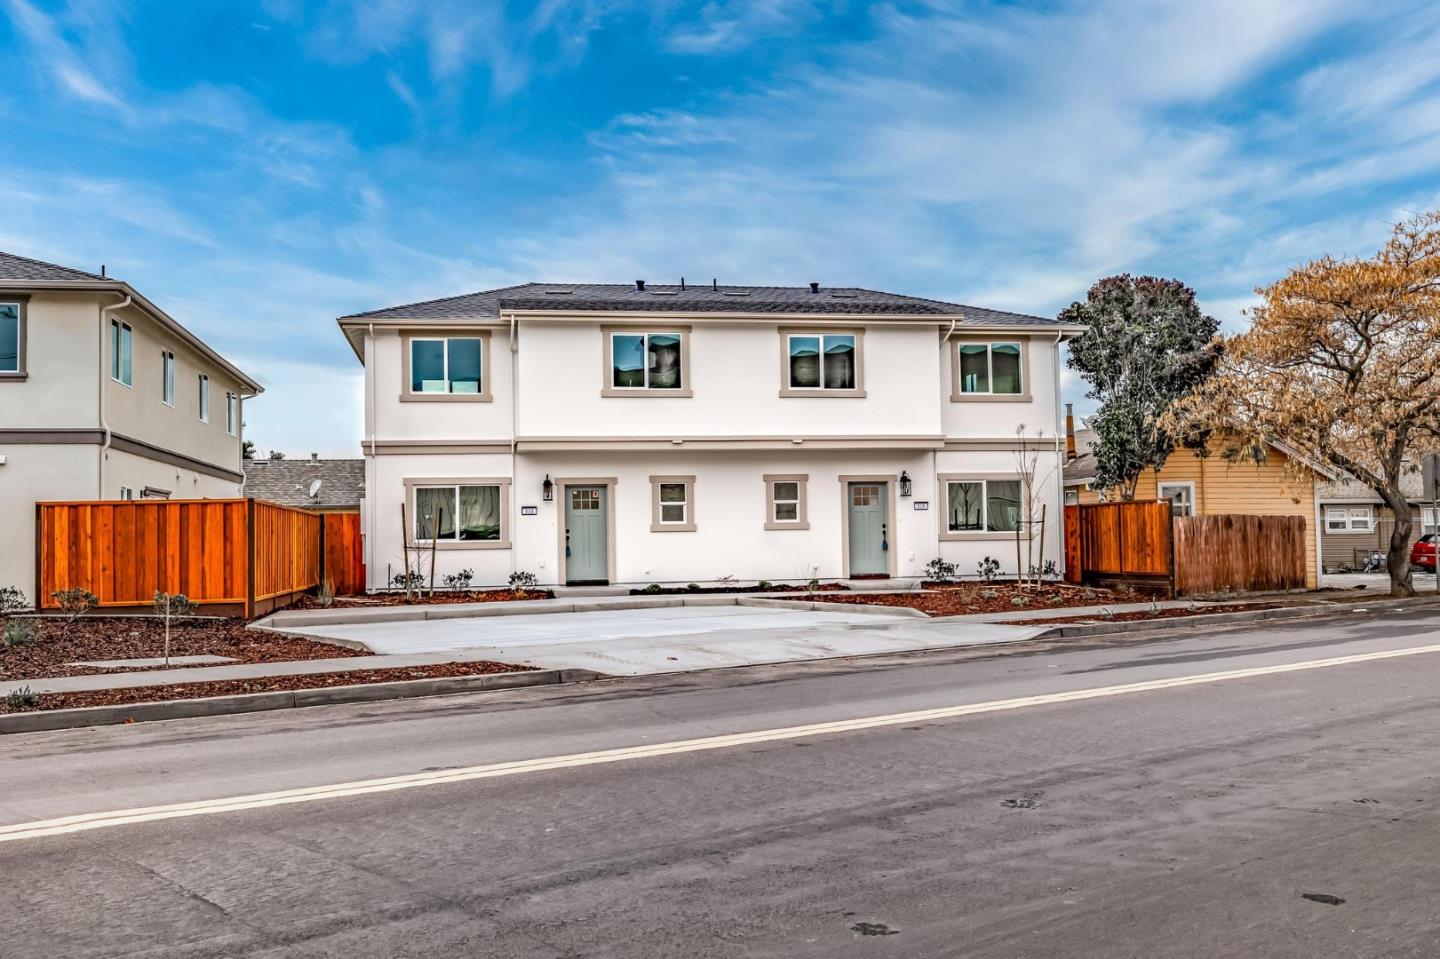 Photo of 814 Prospect Ave in Hollister, CA